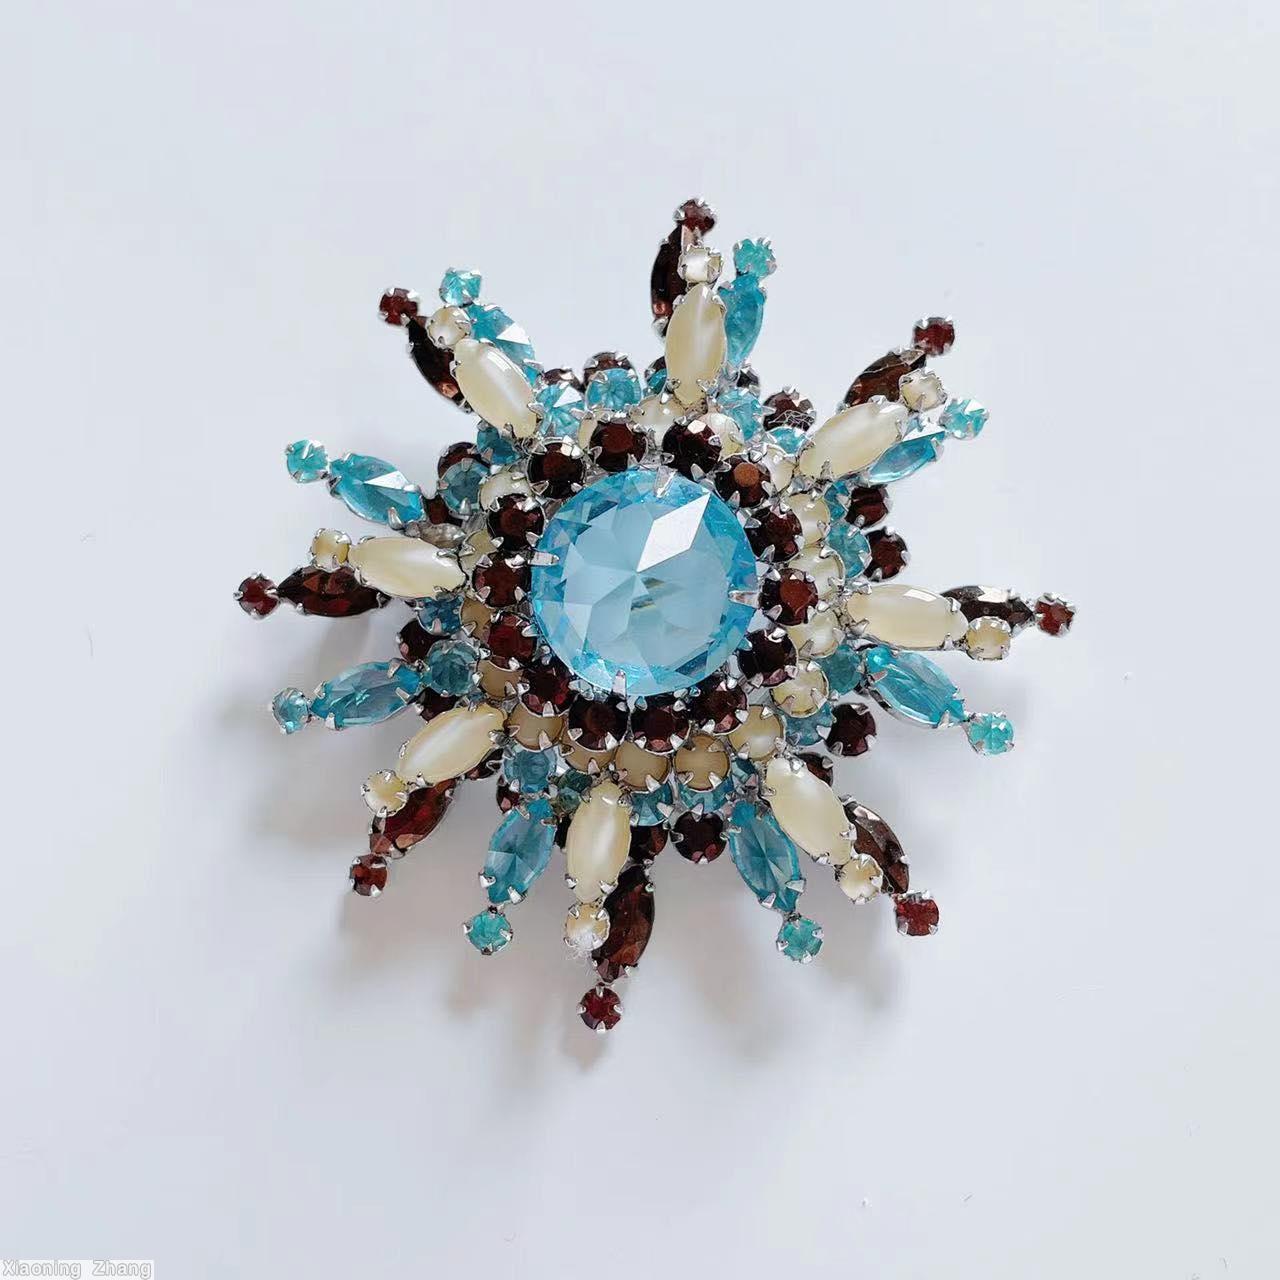 Schreiner 3 level domed radial 8 branch star burst pin large round stone center 14 surrounding small chaton branch 1 navette 1 small chaton moonglow white ice blue clear large faceted round stone brown silvertone jewelry